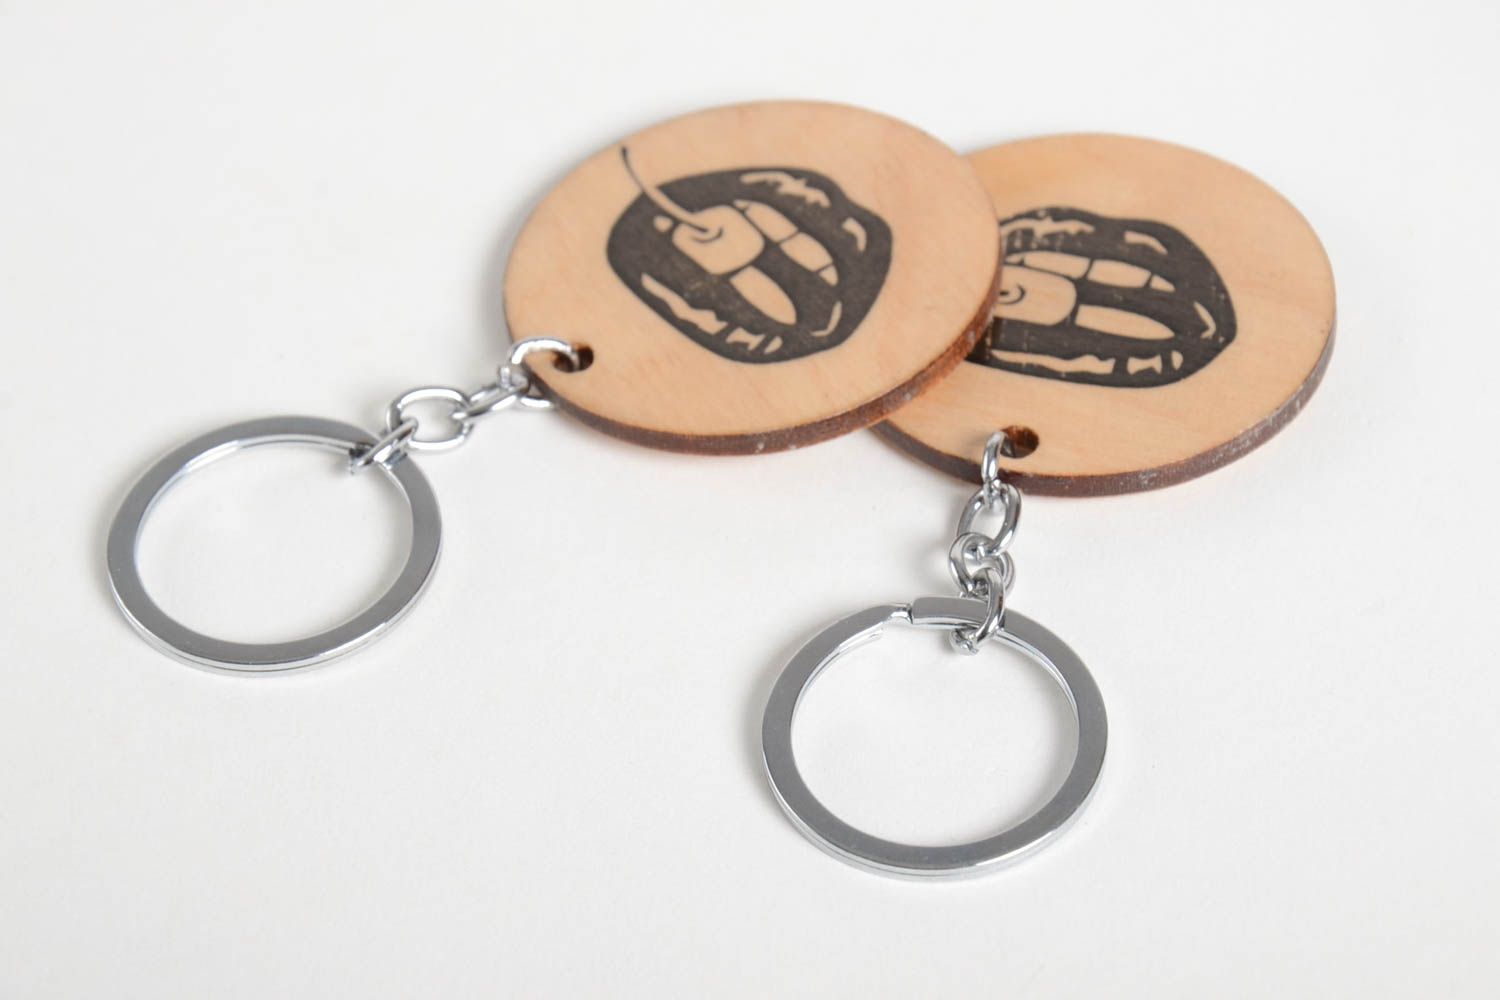 Handmade keychains unusual wooden souvenir for men set of 2 items gift ideas photo 3